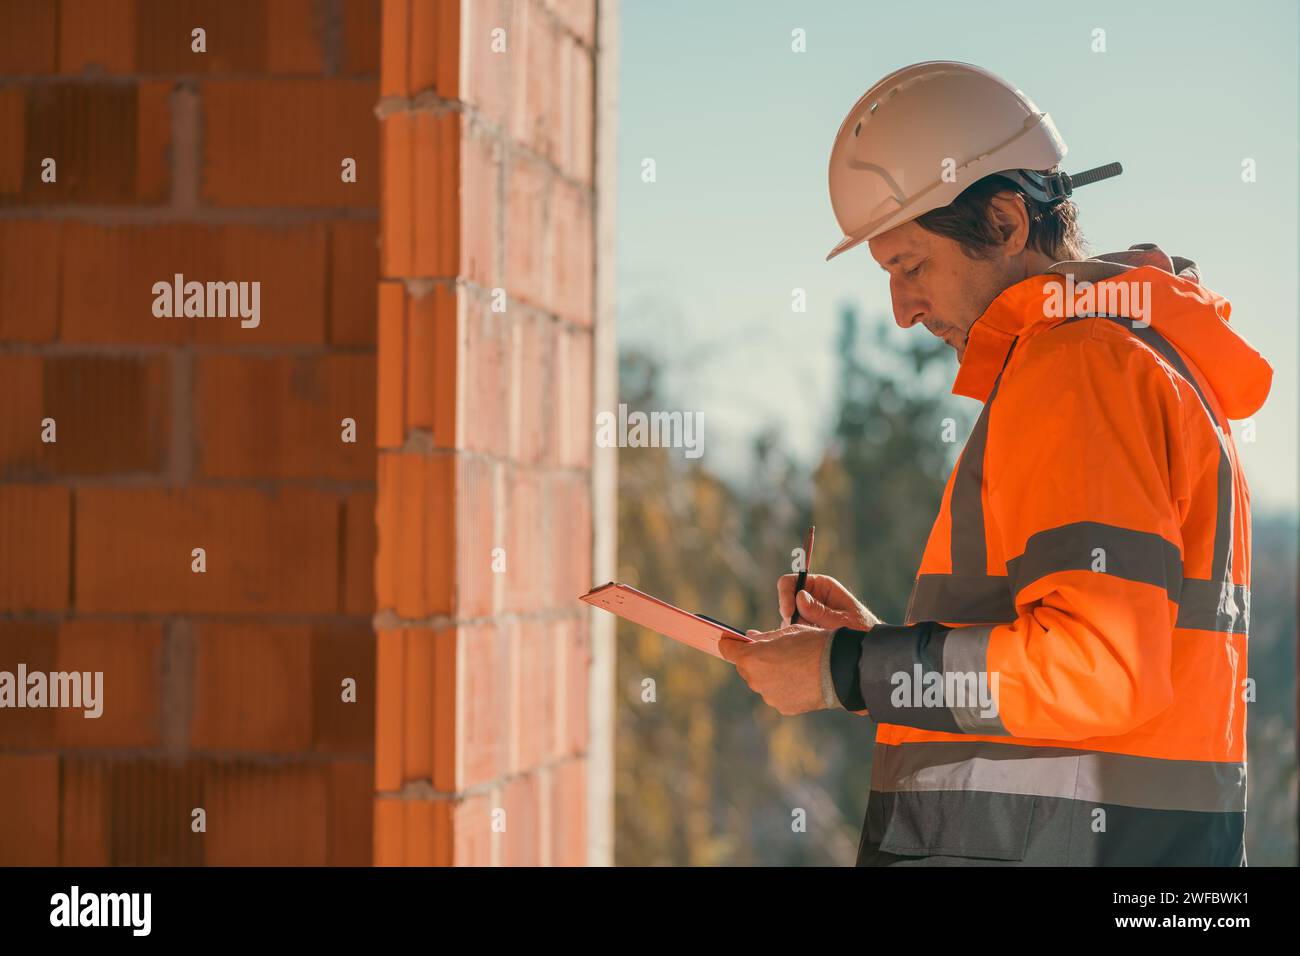 Construction engineer making notes and remarks during building site inspection, selective focus Stock Photo